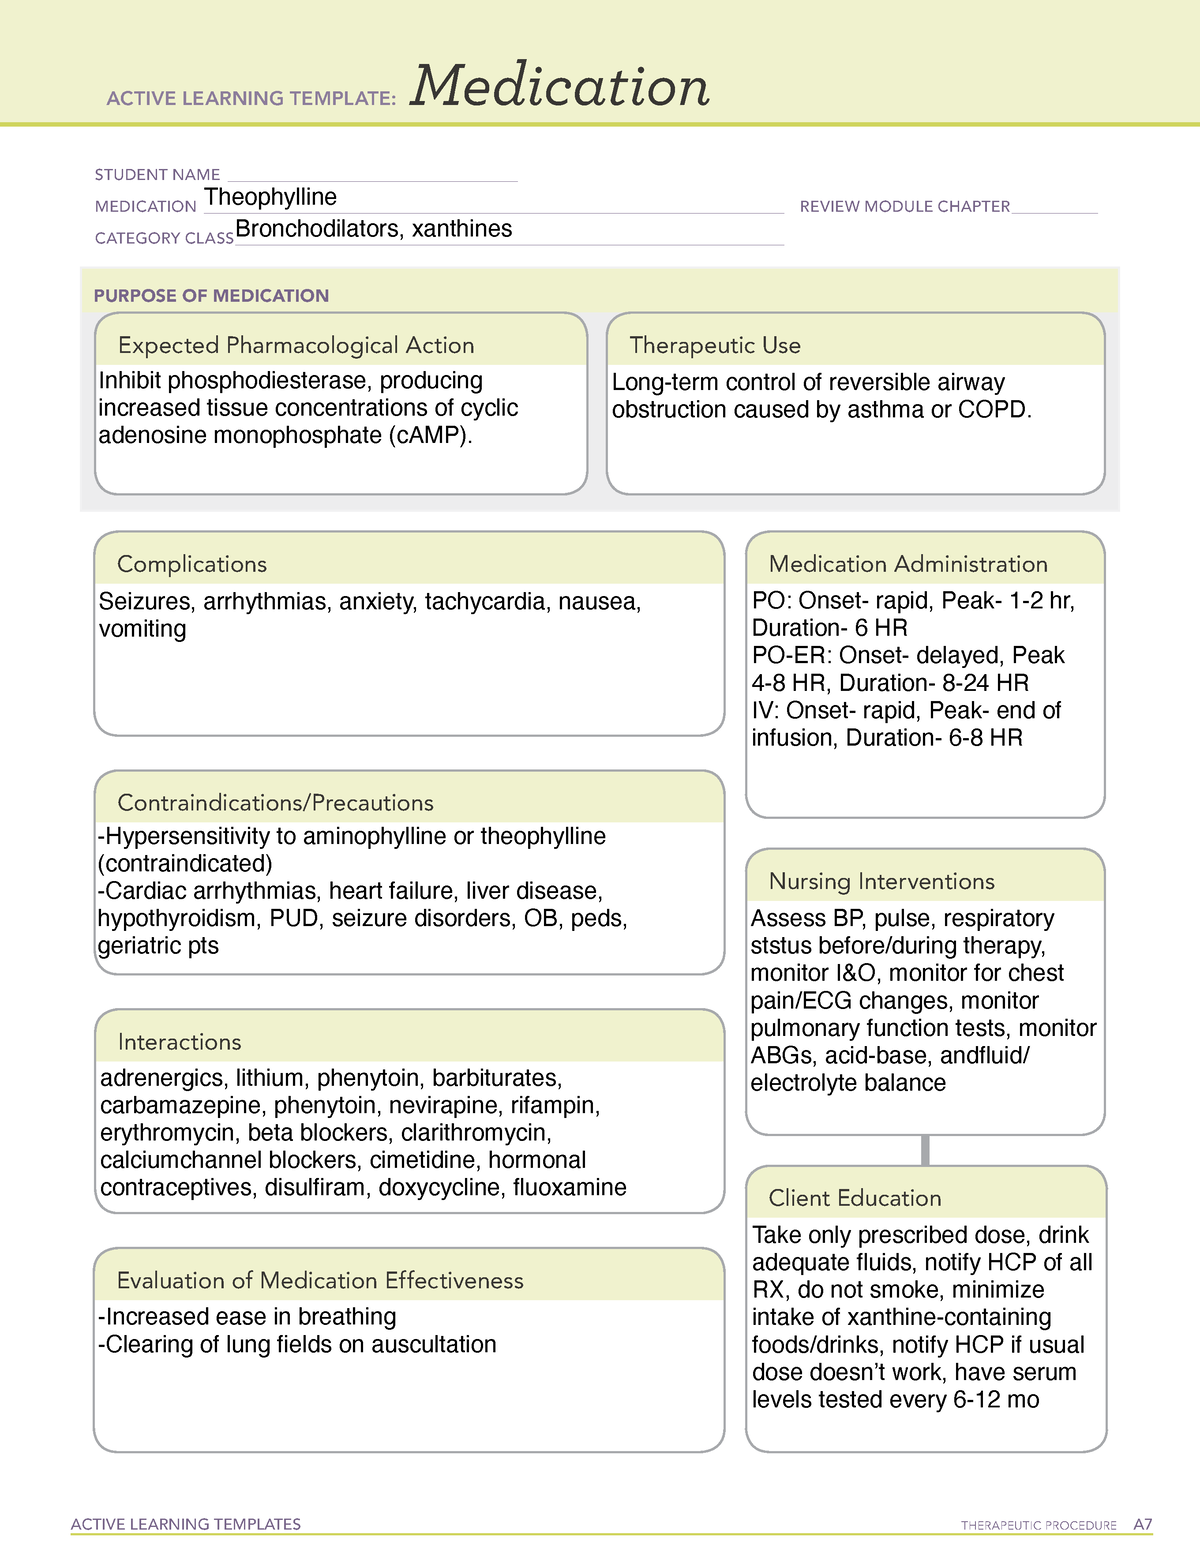 Theophylline ACTIVE LEARNING TEMPLATES THERAPEUTIC PROCEDURE A